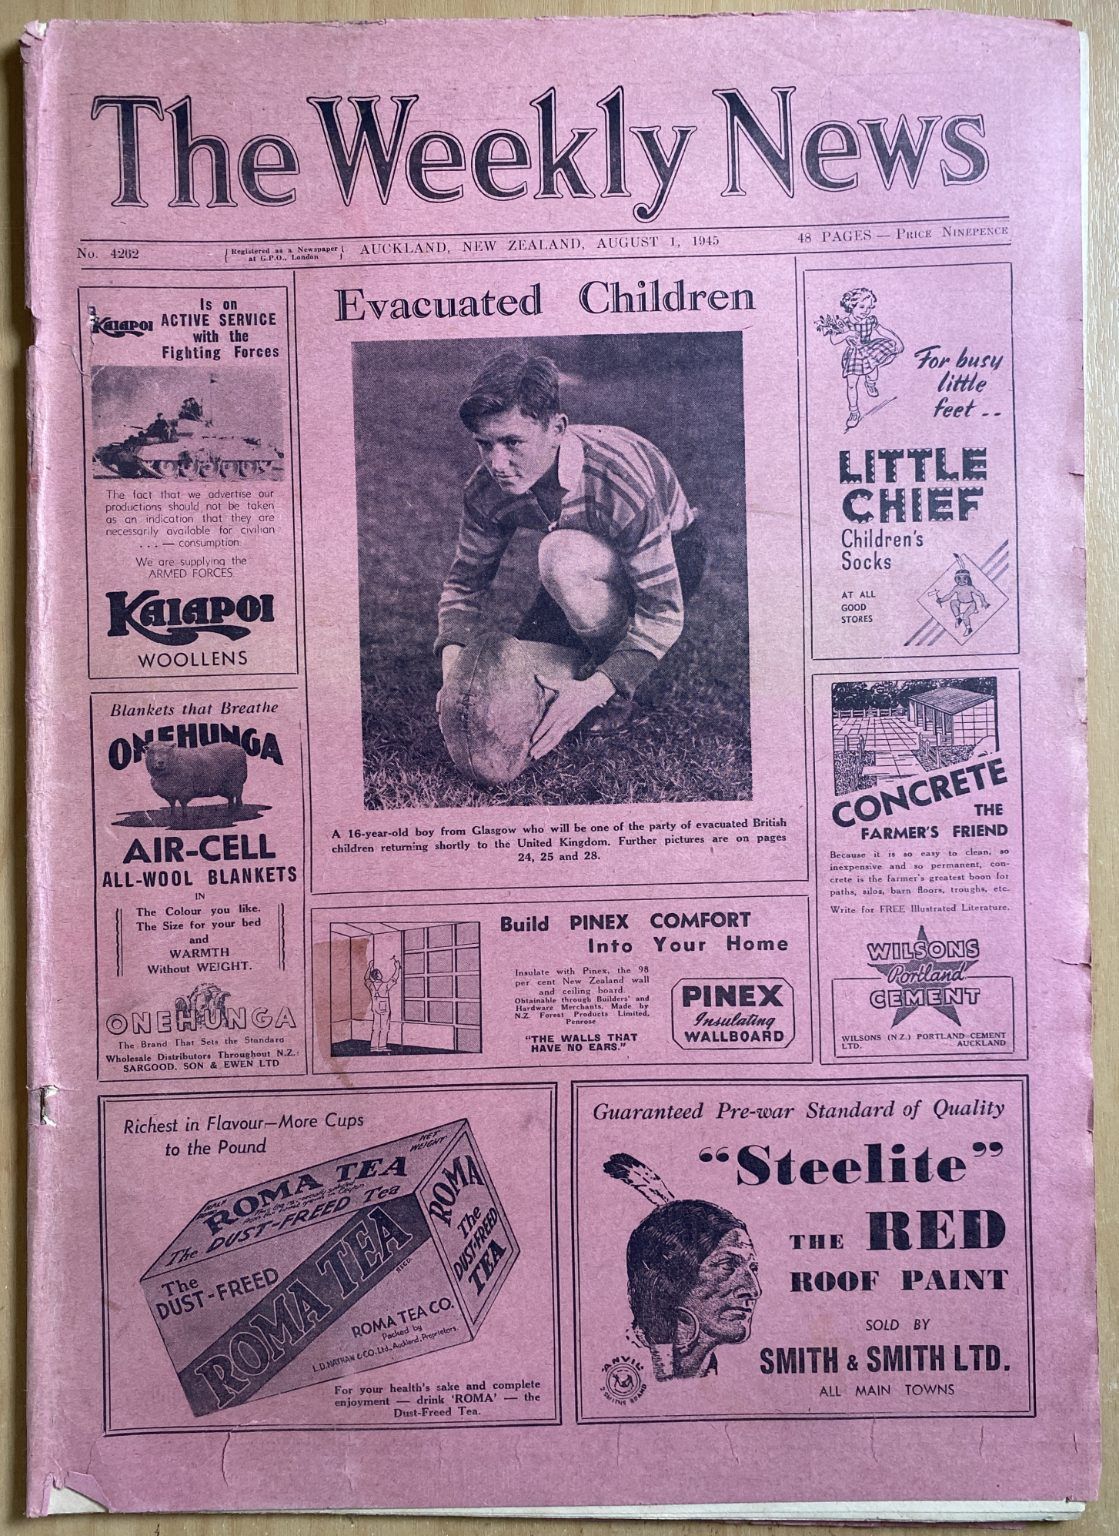 OLD NEWSPAPER: The Weekly News - No. 4262, 1 August 1945